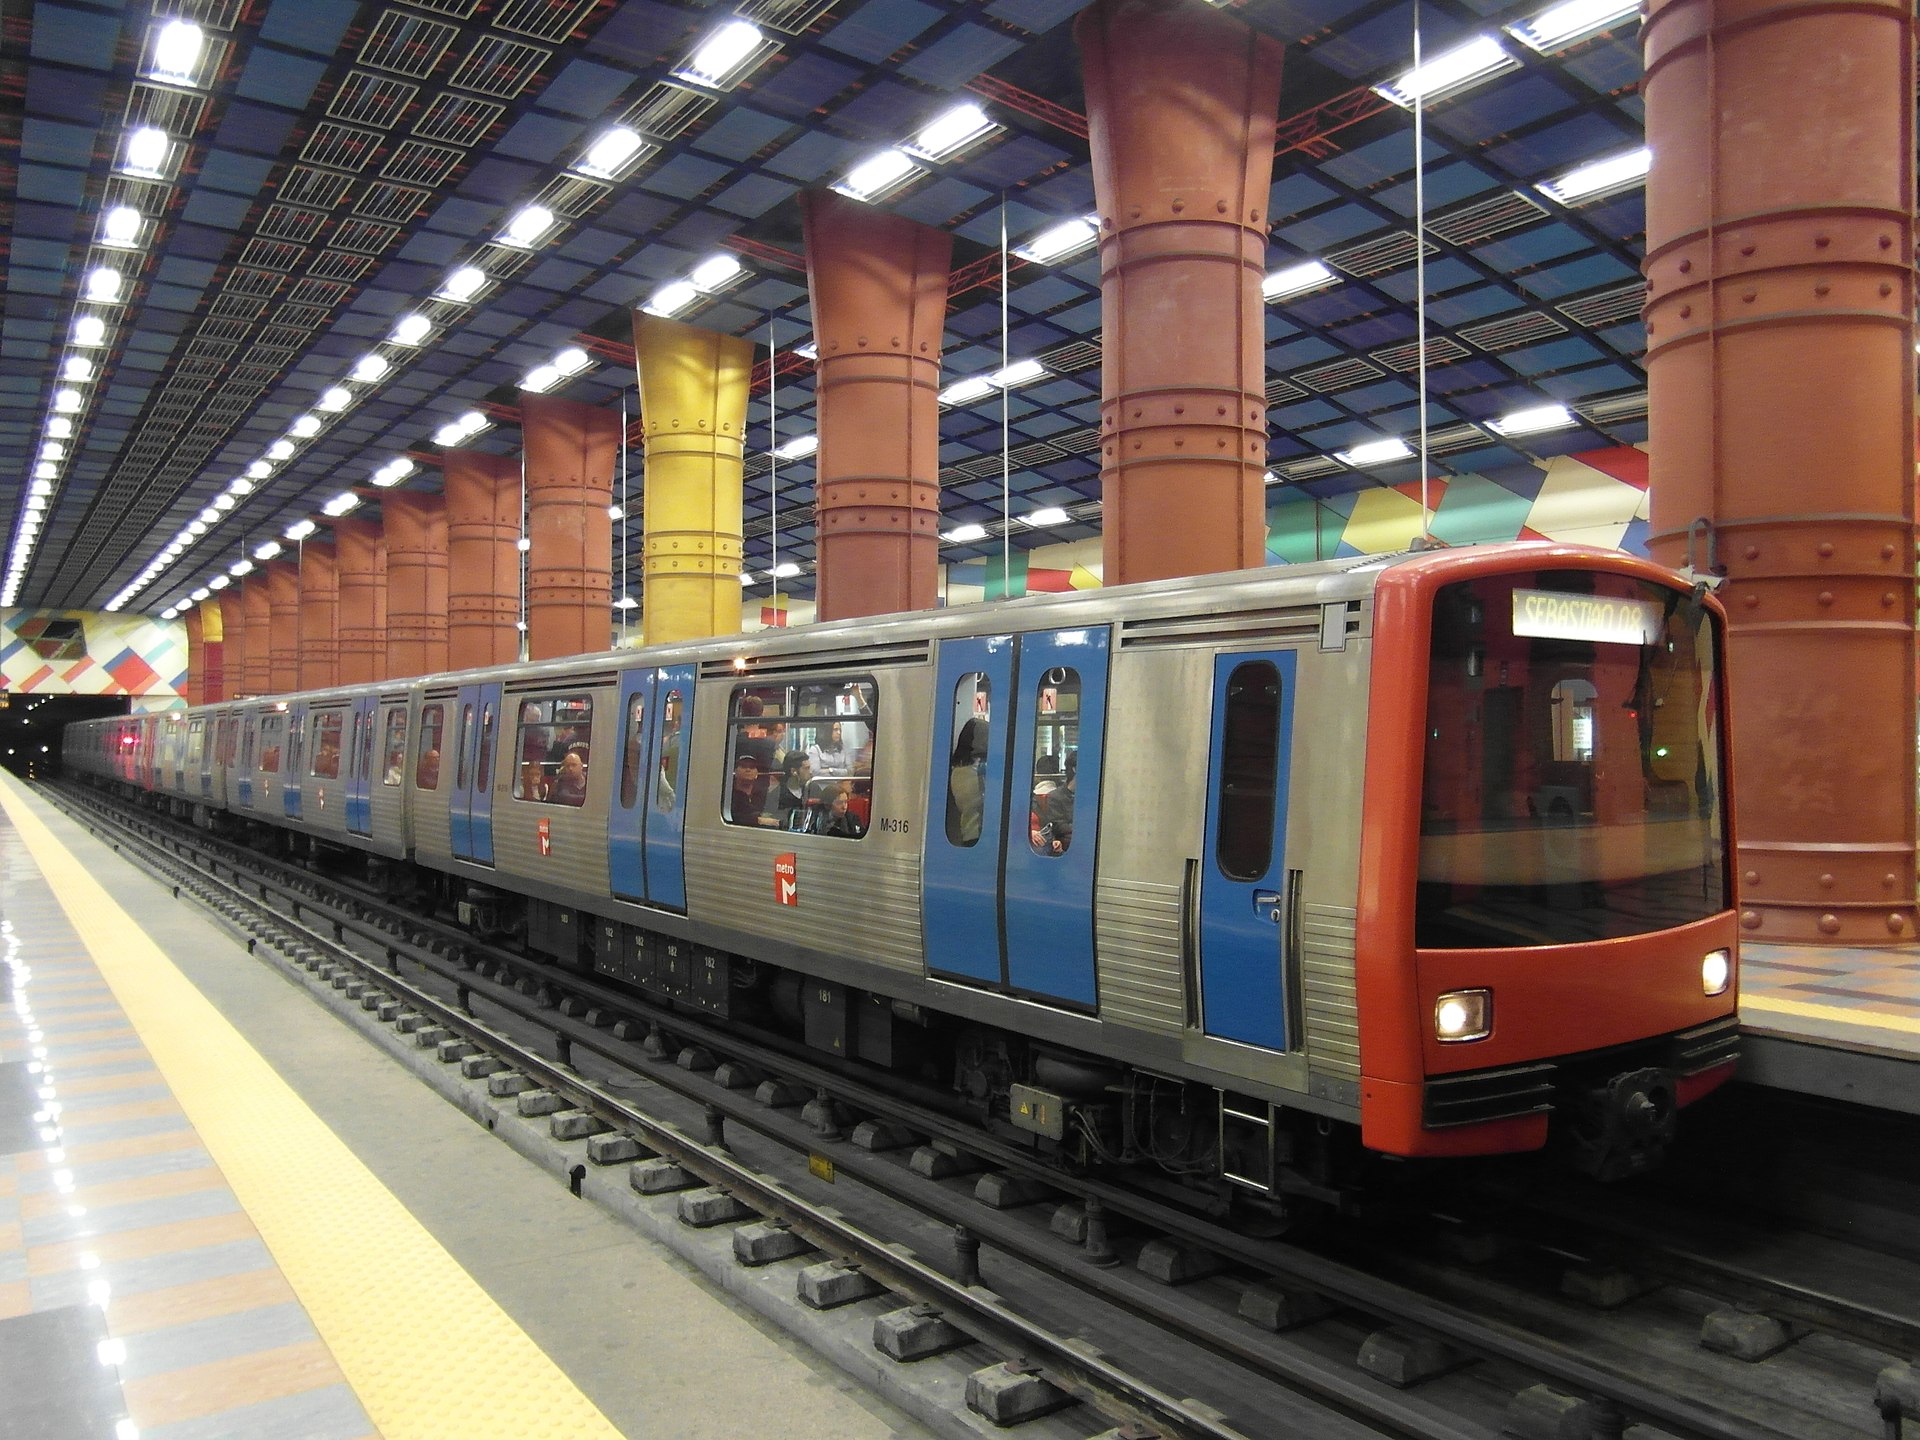 The ML95 train from Sorefame and Bombardier Transportation in the Lisbon Metro